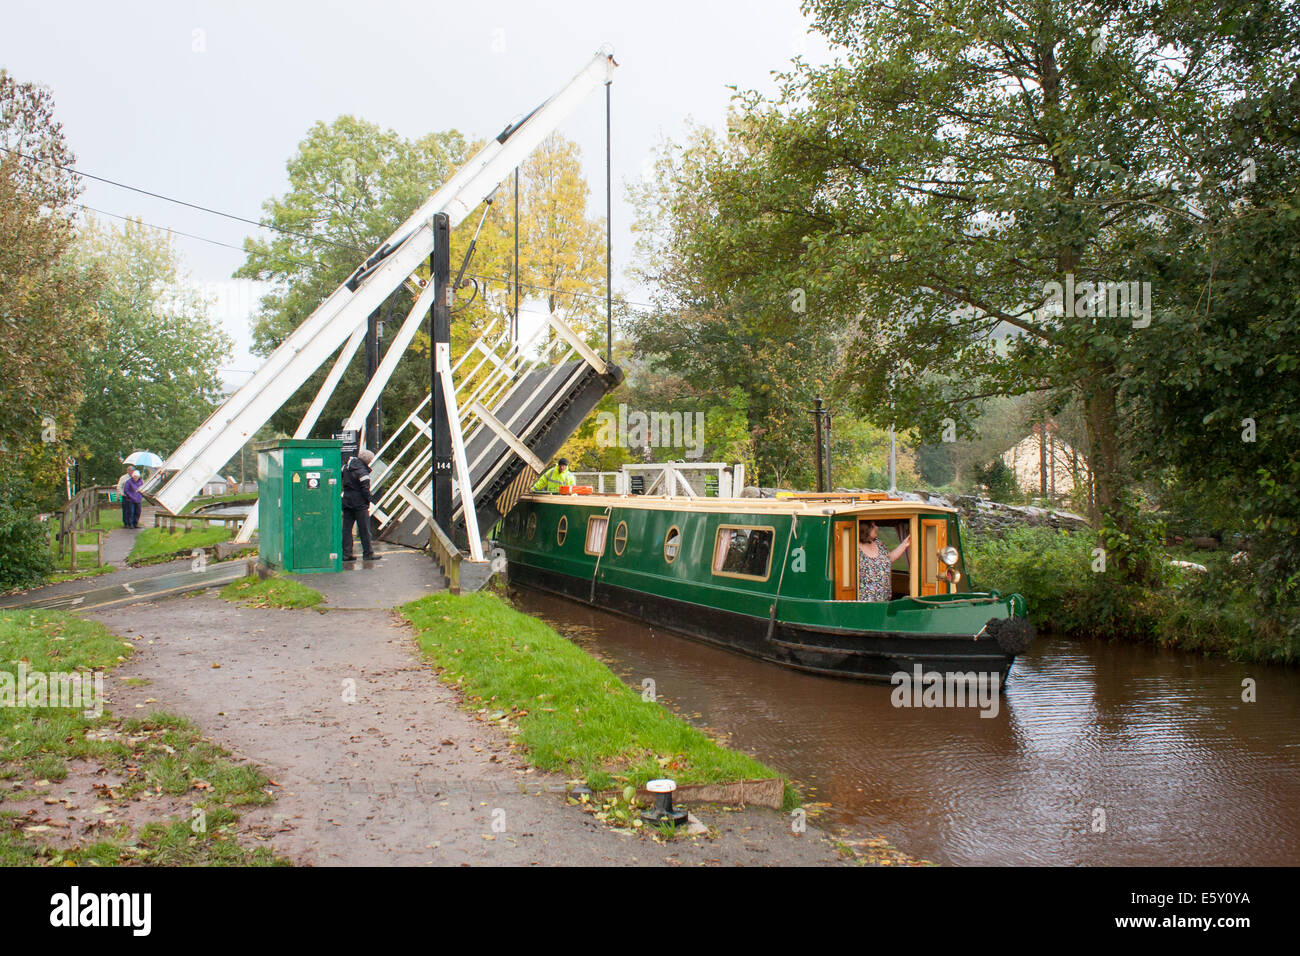 Narrowboat on Monmouthshire and Brecon Canal, Canol Pentre, Talybont-on-Usk, Powys, Wales, GB, UK Stock Photo